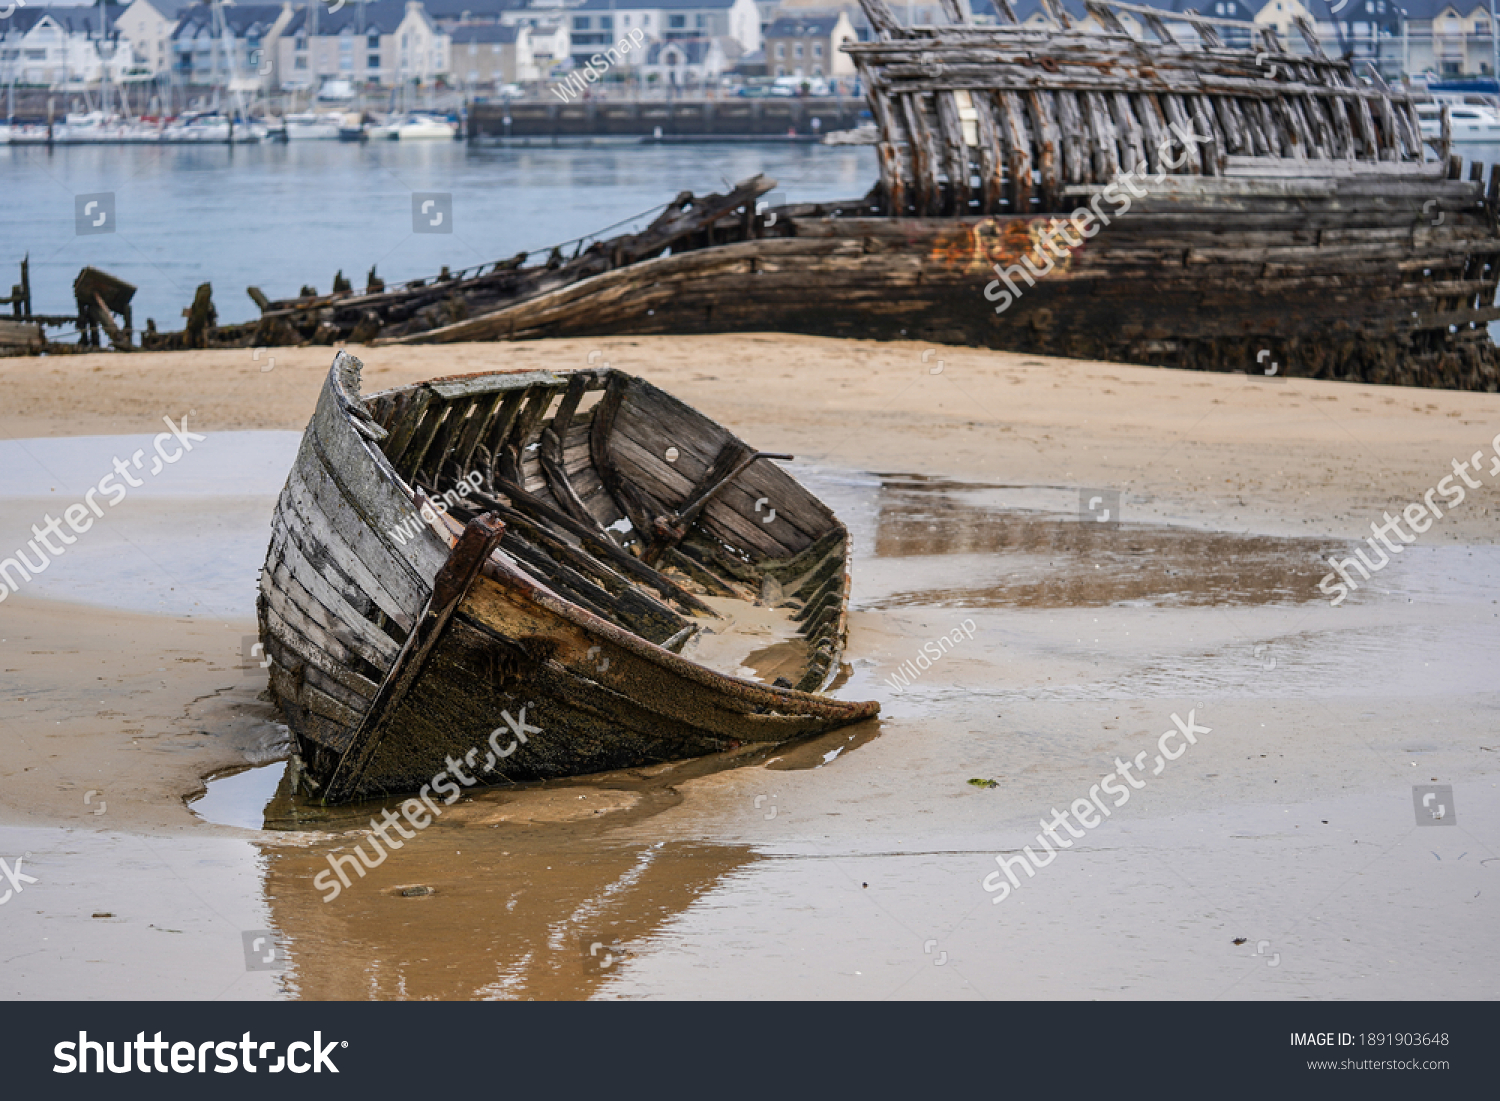 Stranded fishing boats on the beach. Historical wreck in France. #1891903648